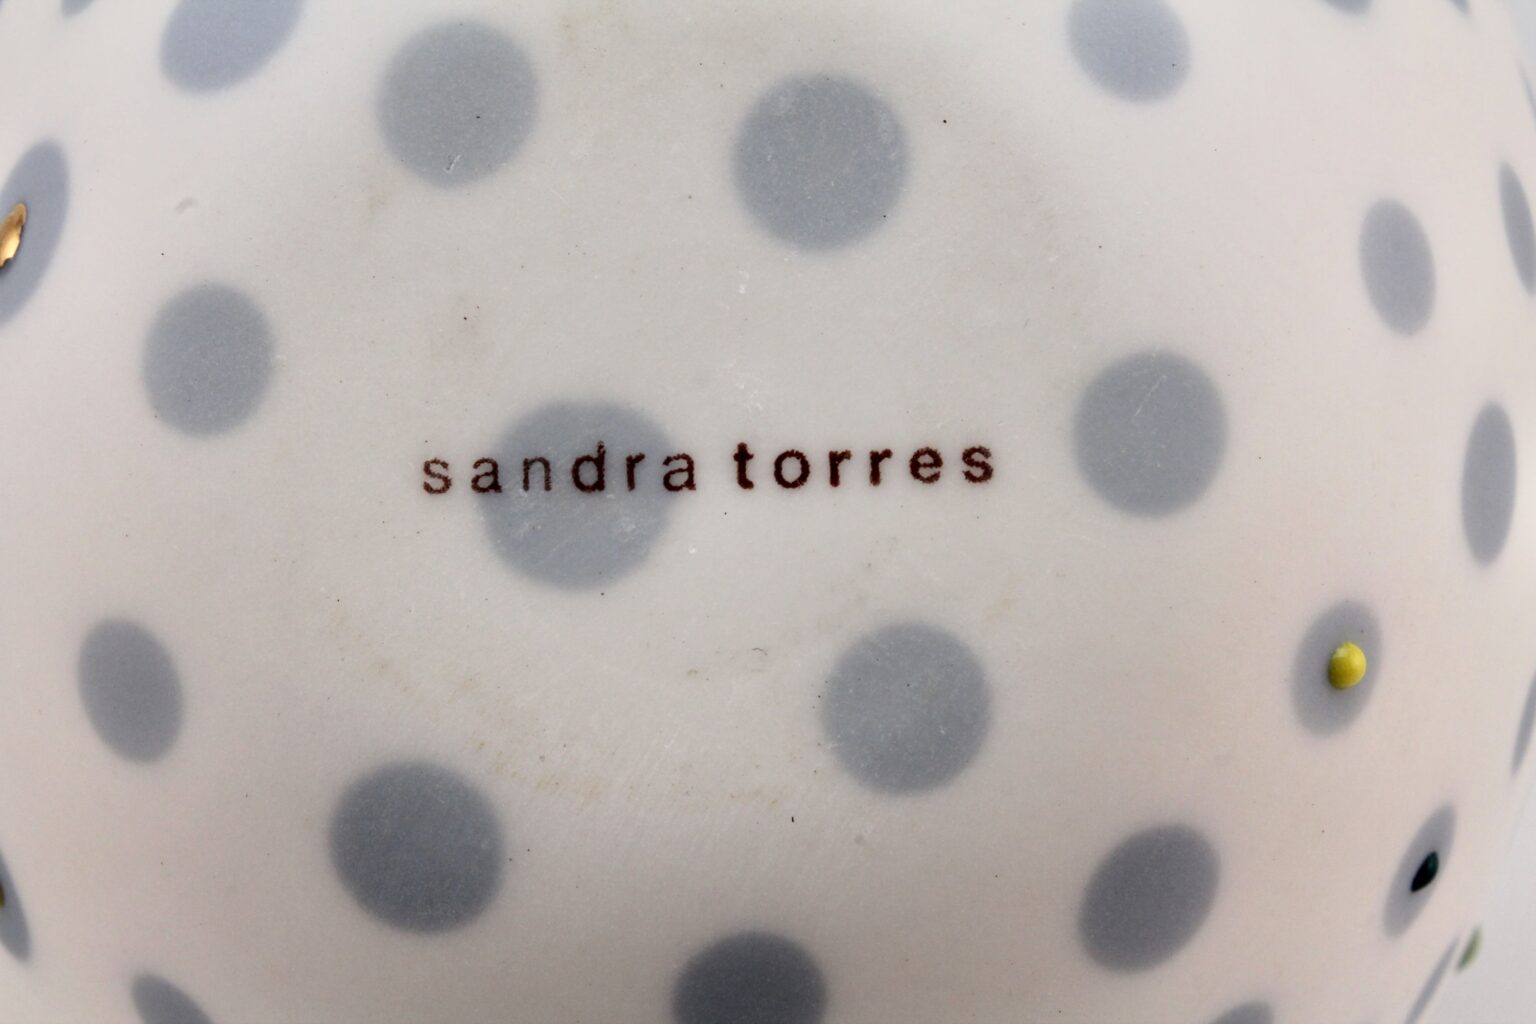 Made by Sandra Torres